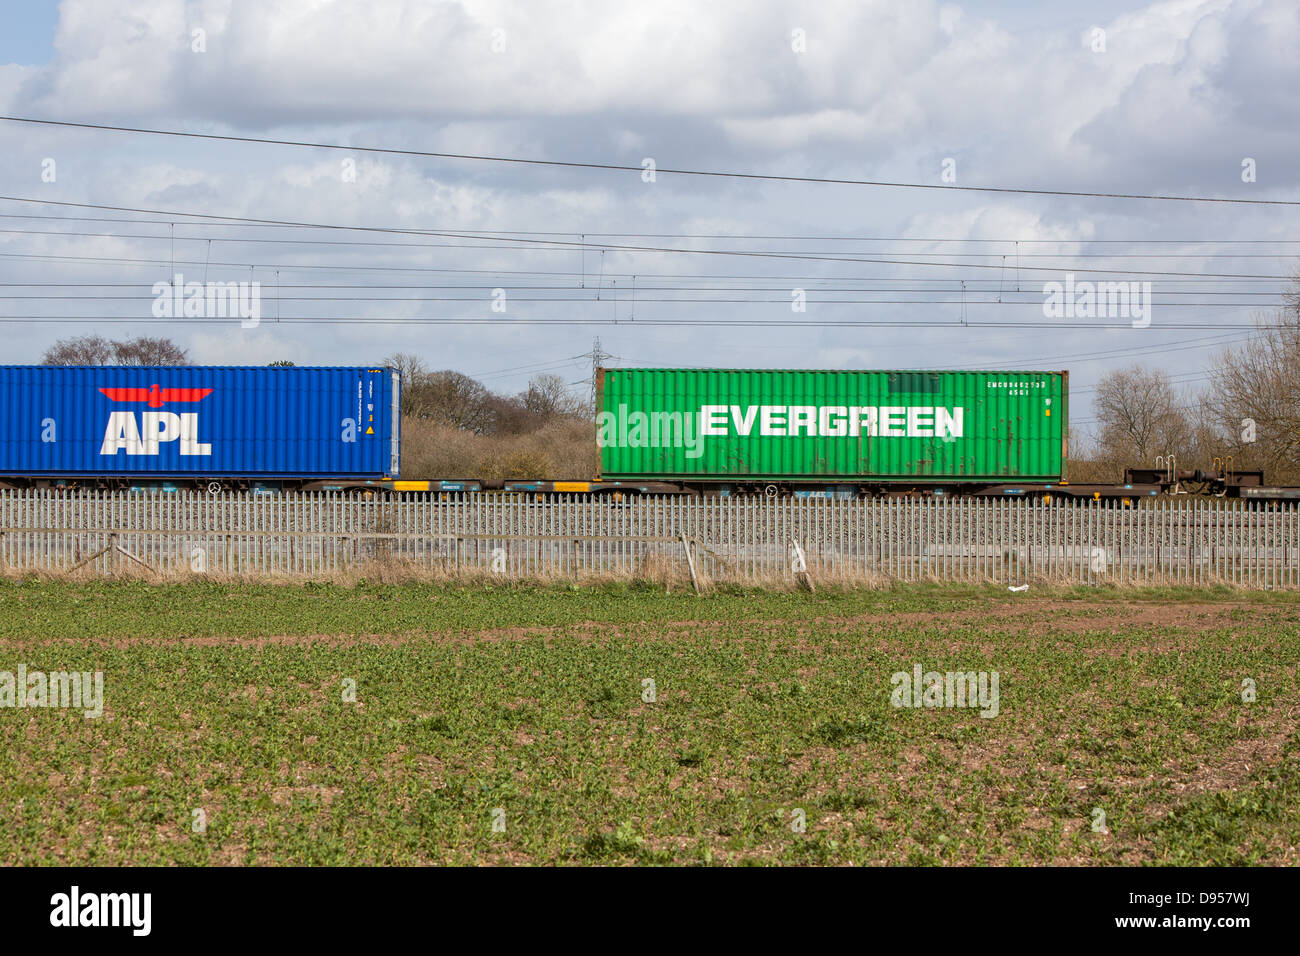 Shipping containers on the railway. Evergreen and APL containers. Stock Photo